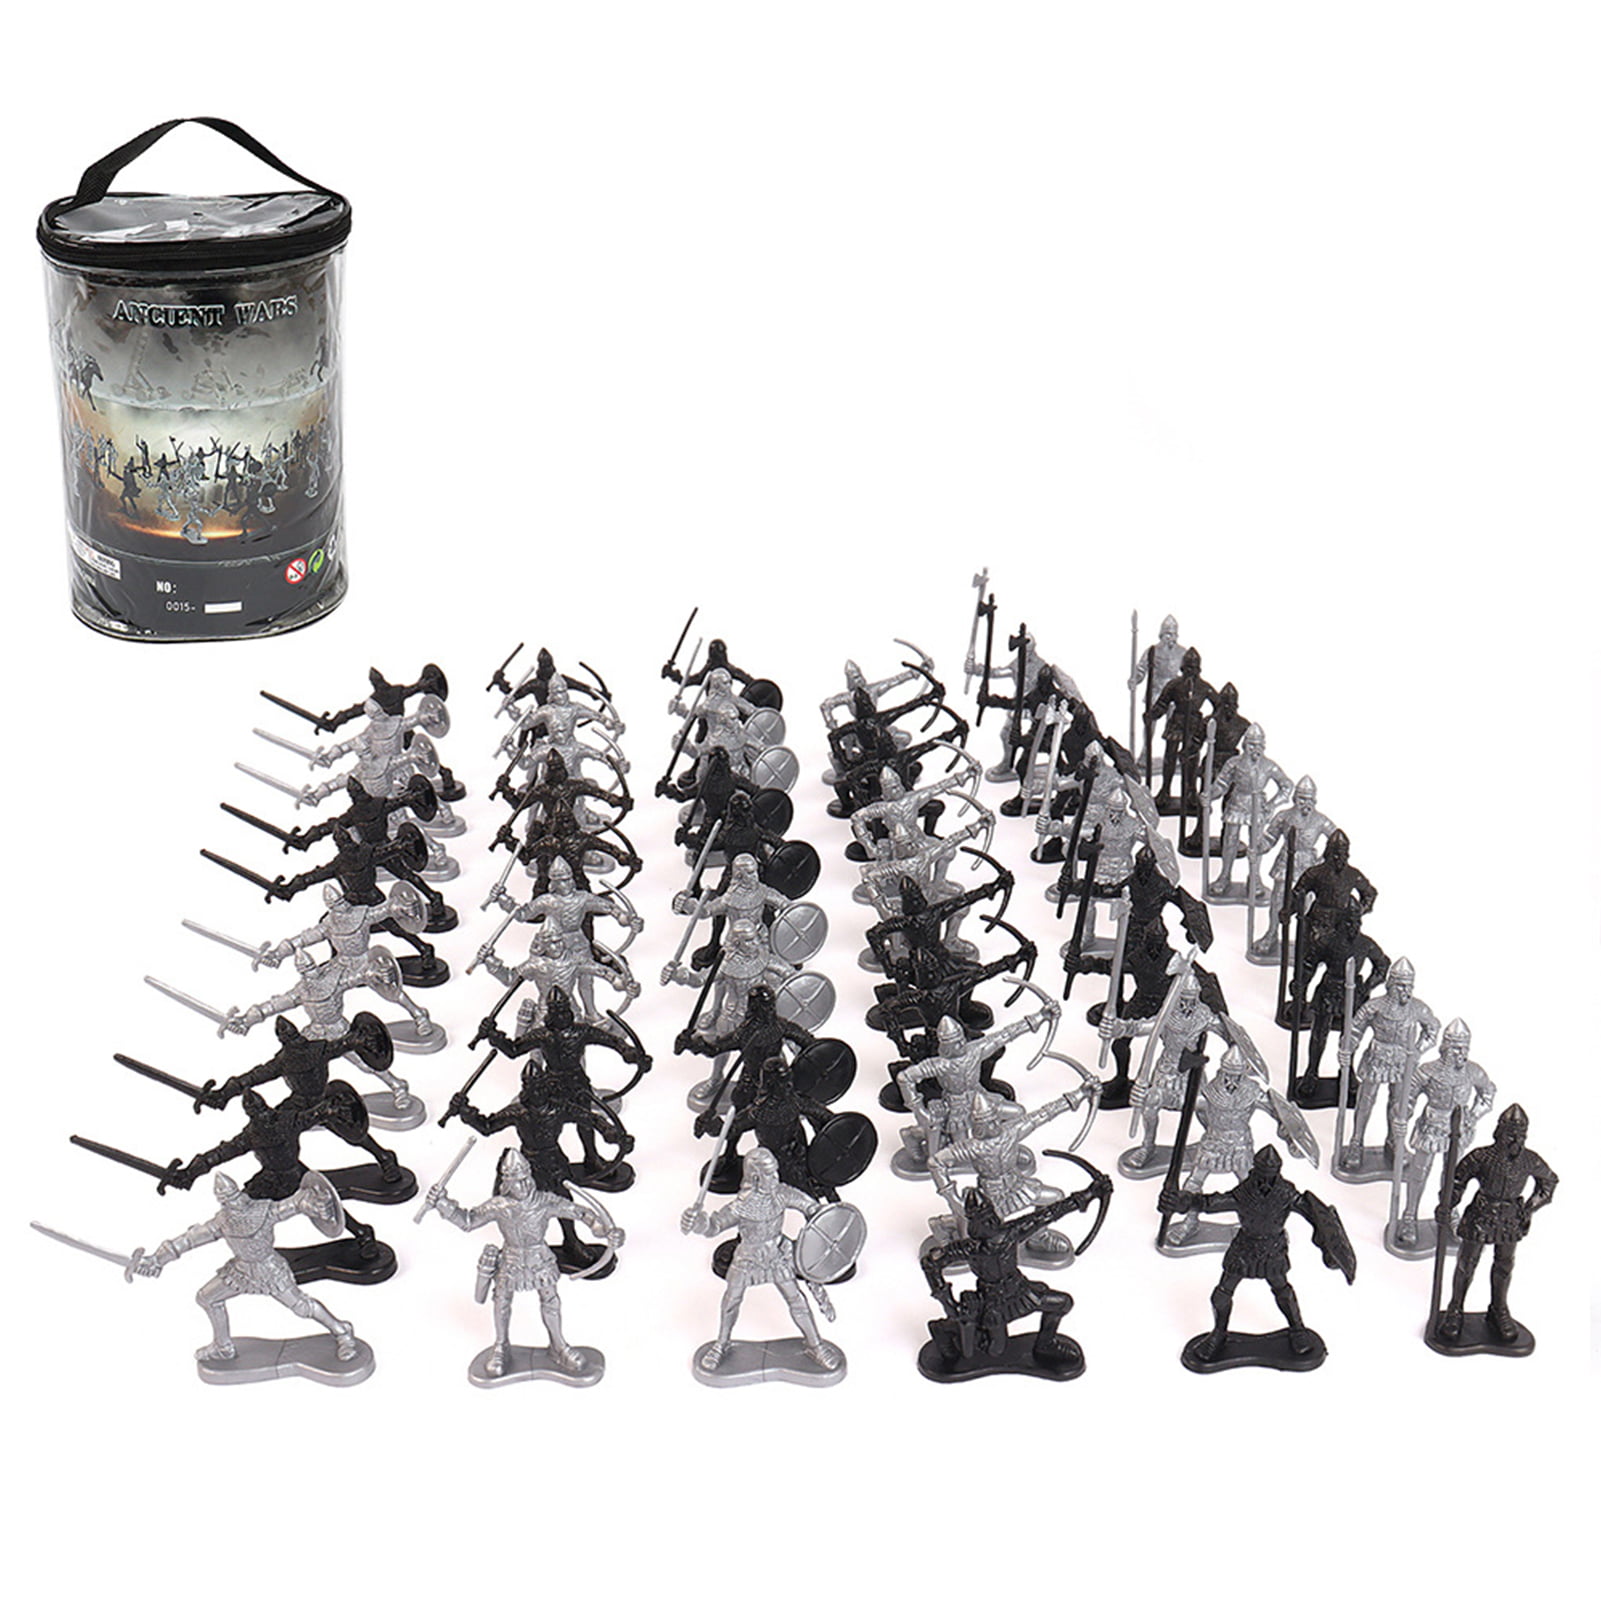 Medieval Castle Model Toy Knights Catapult Soldiers Infantry Accessory Playset